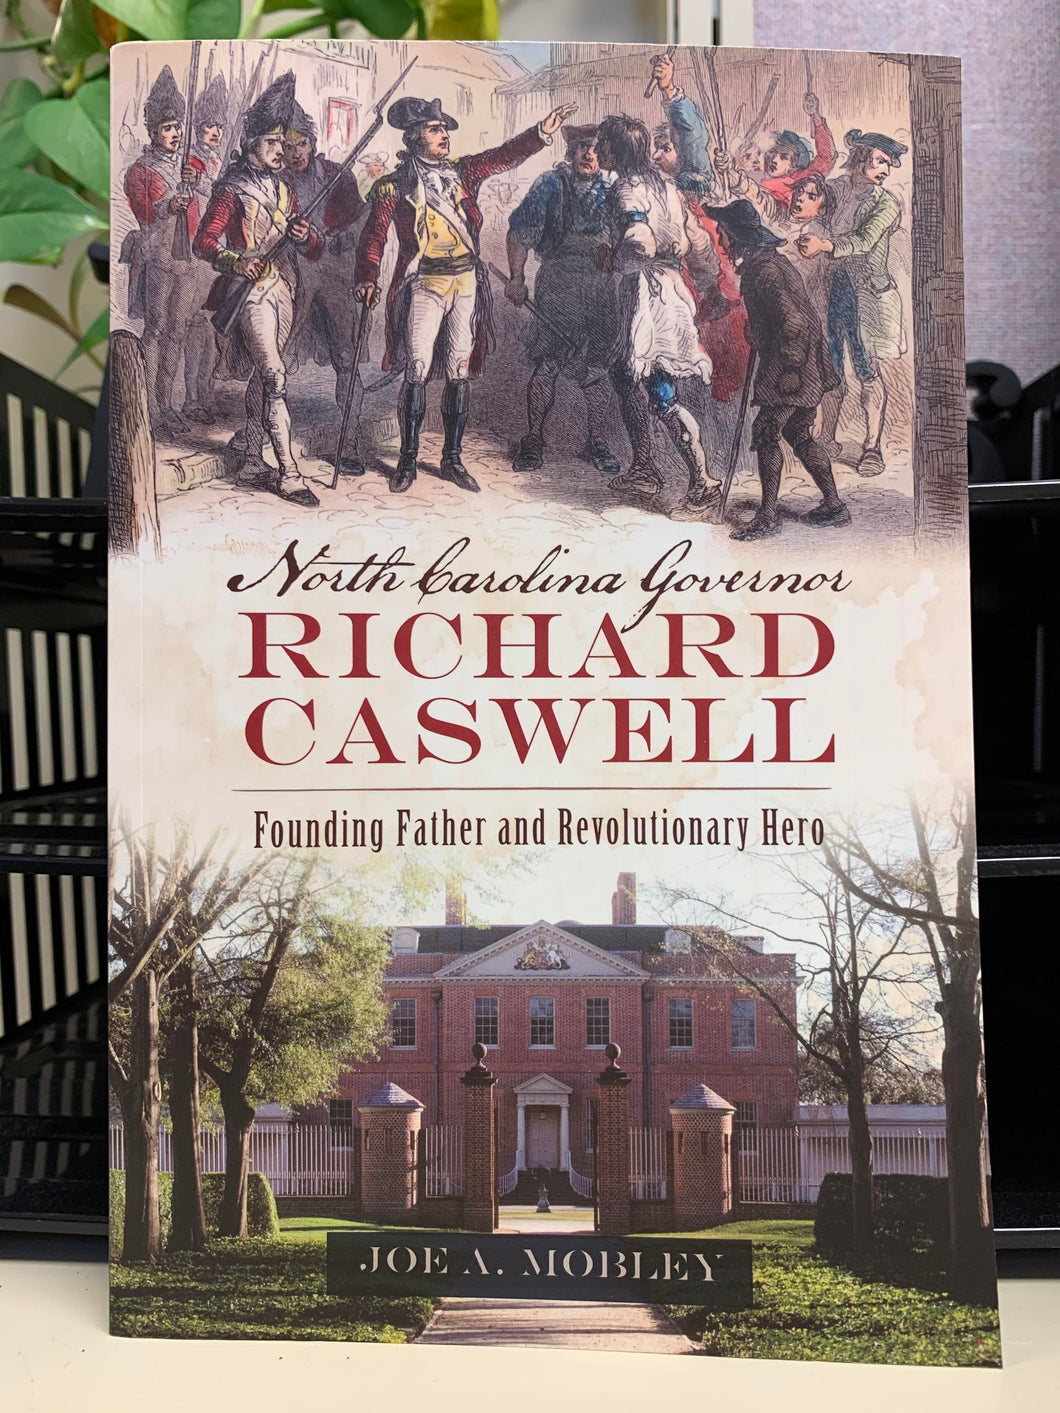 North Carolina Governor Richard Caswell: Founding Father and Revolutionary Hero by Joe A. Mobley